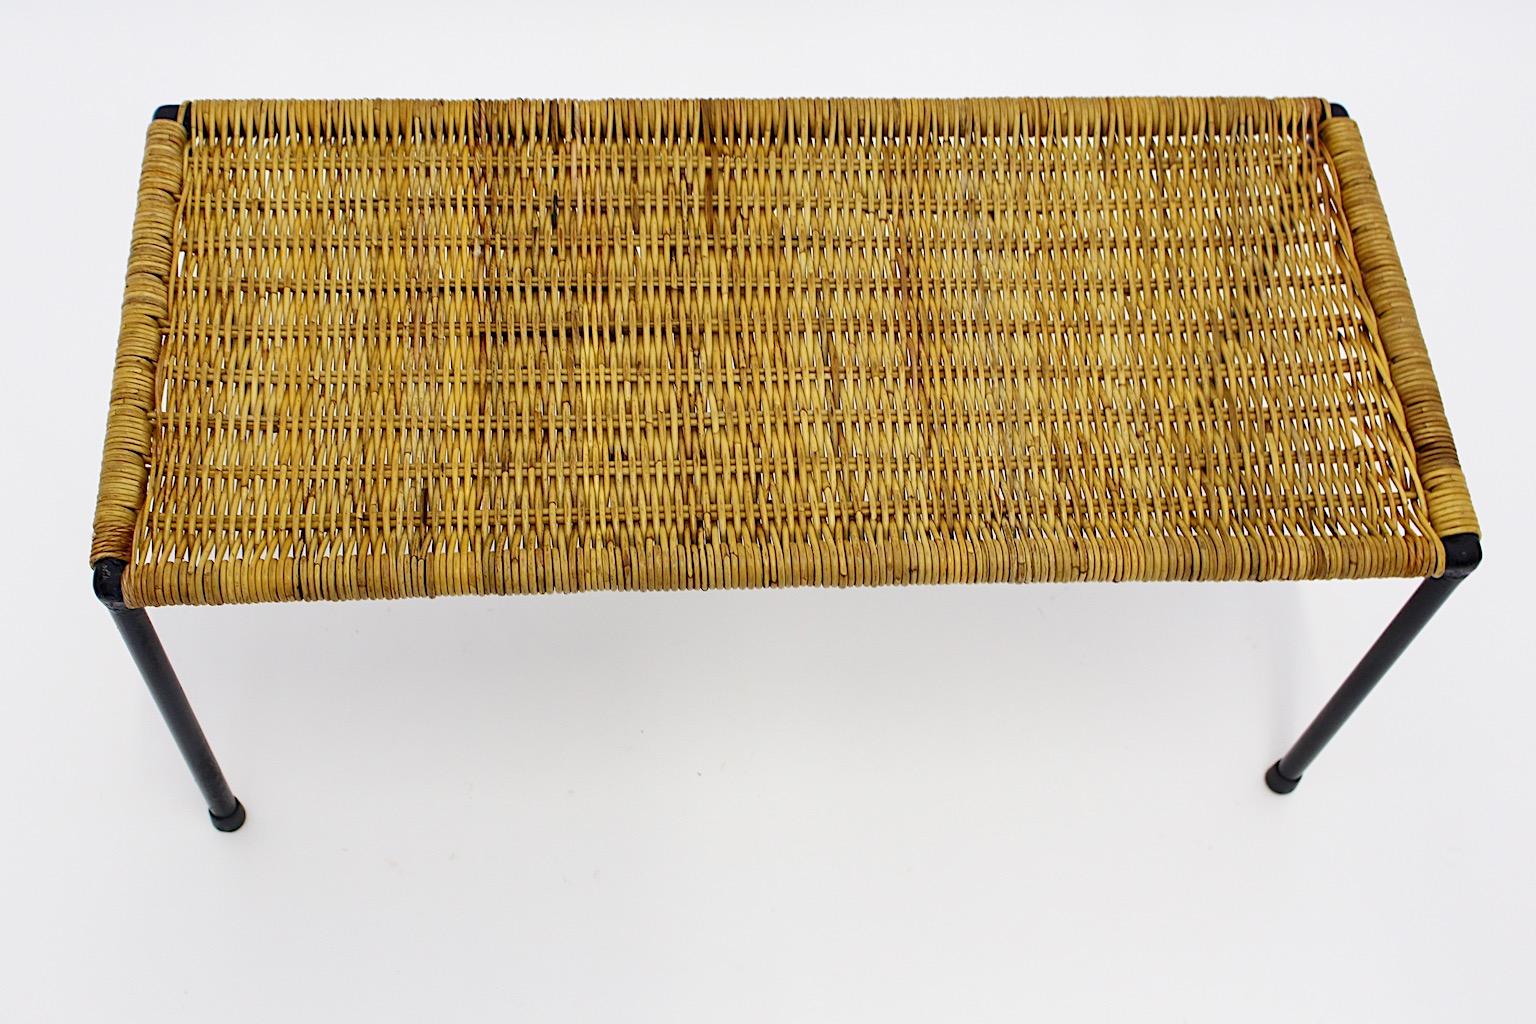 A Mid-Century Modern wicker rattan side table or sofa table, which was designed and manufactured in Austria, 1950s.
While the table frame was made of black lacquered tube steel, the tabletop shows handwoven wicker top.
Throughout its rattan top it